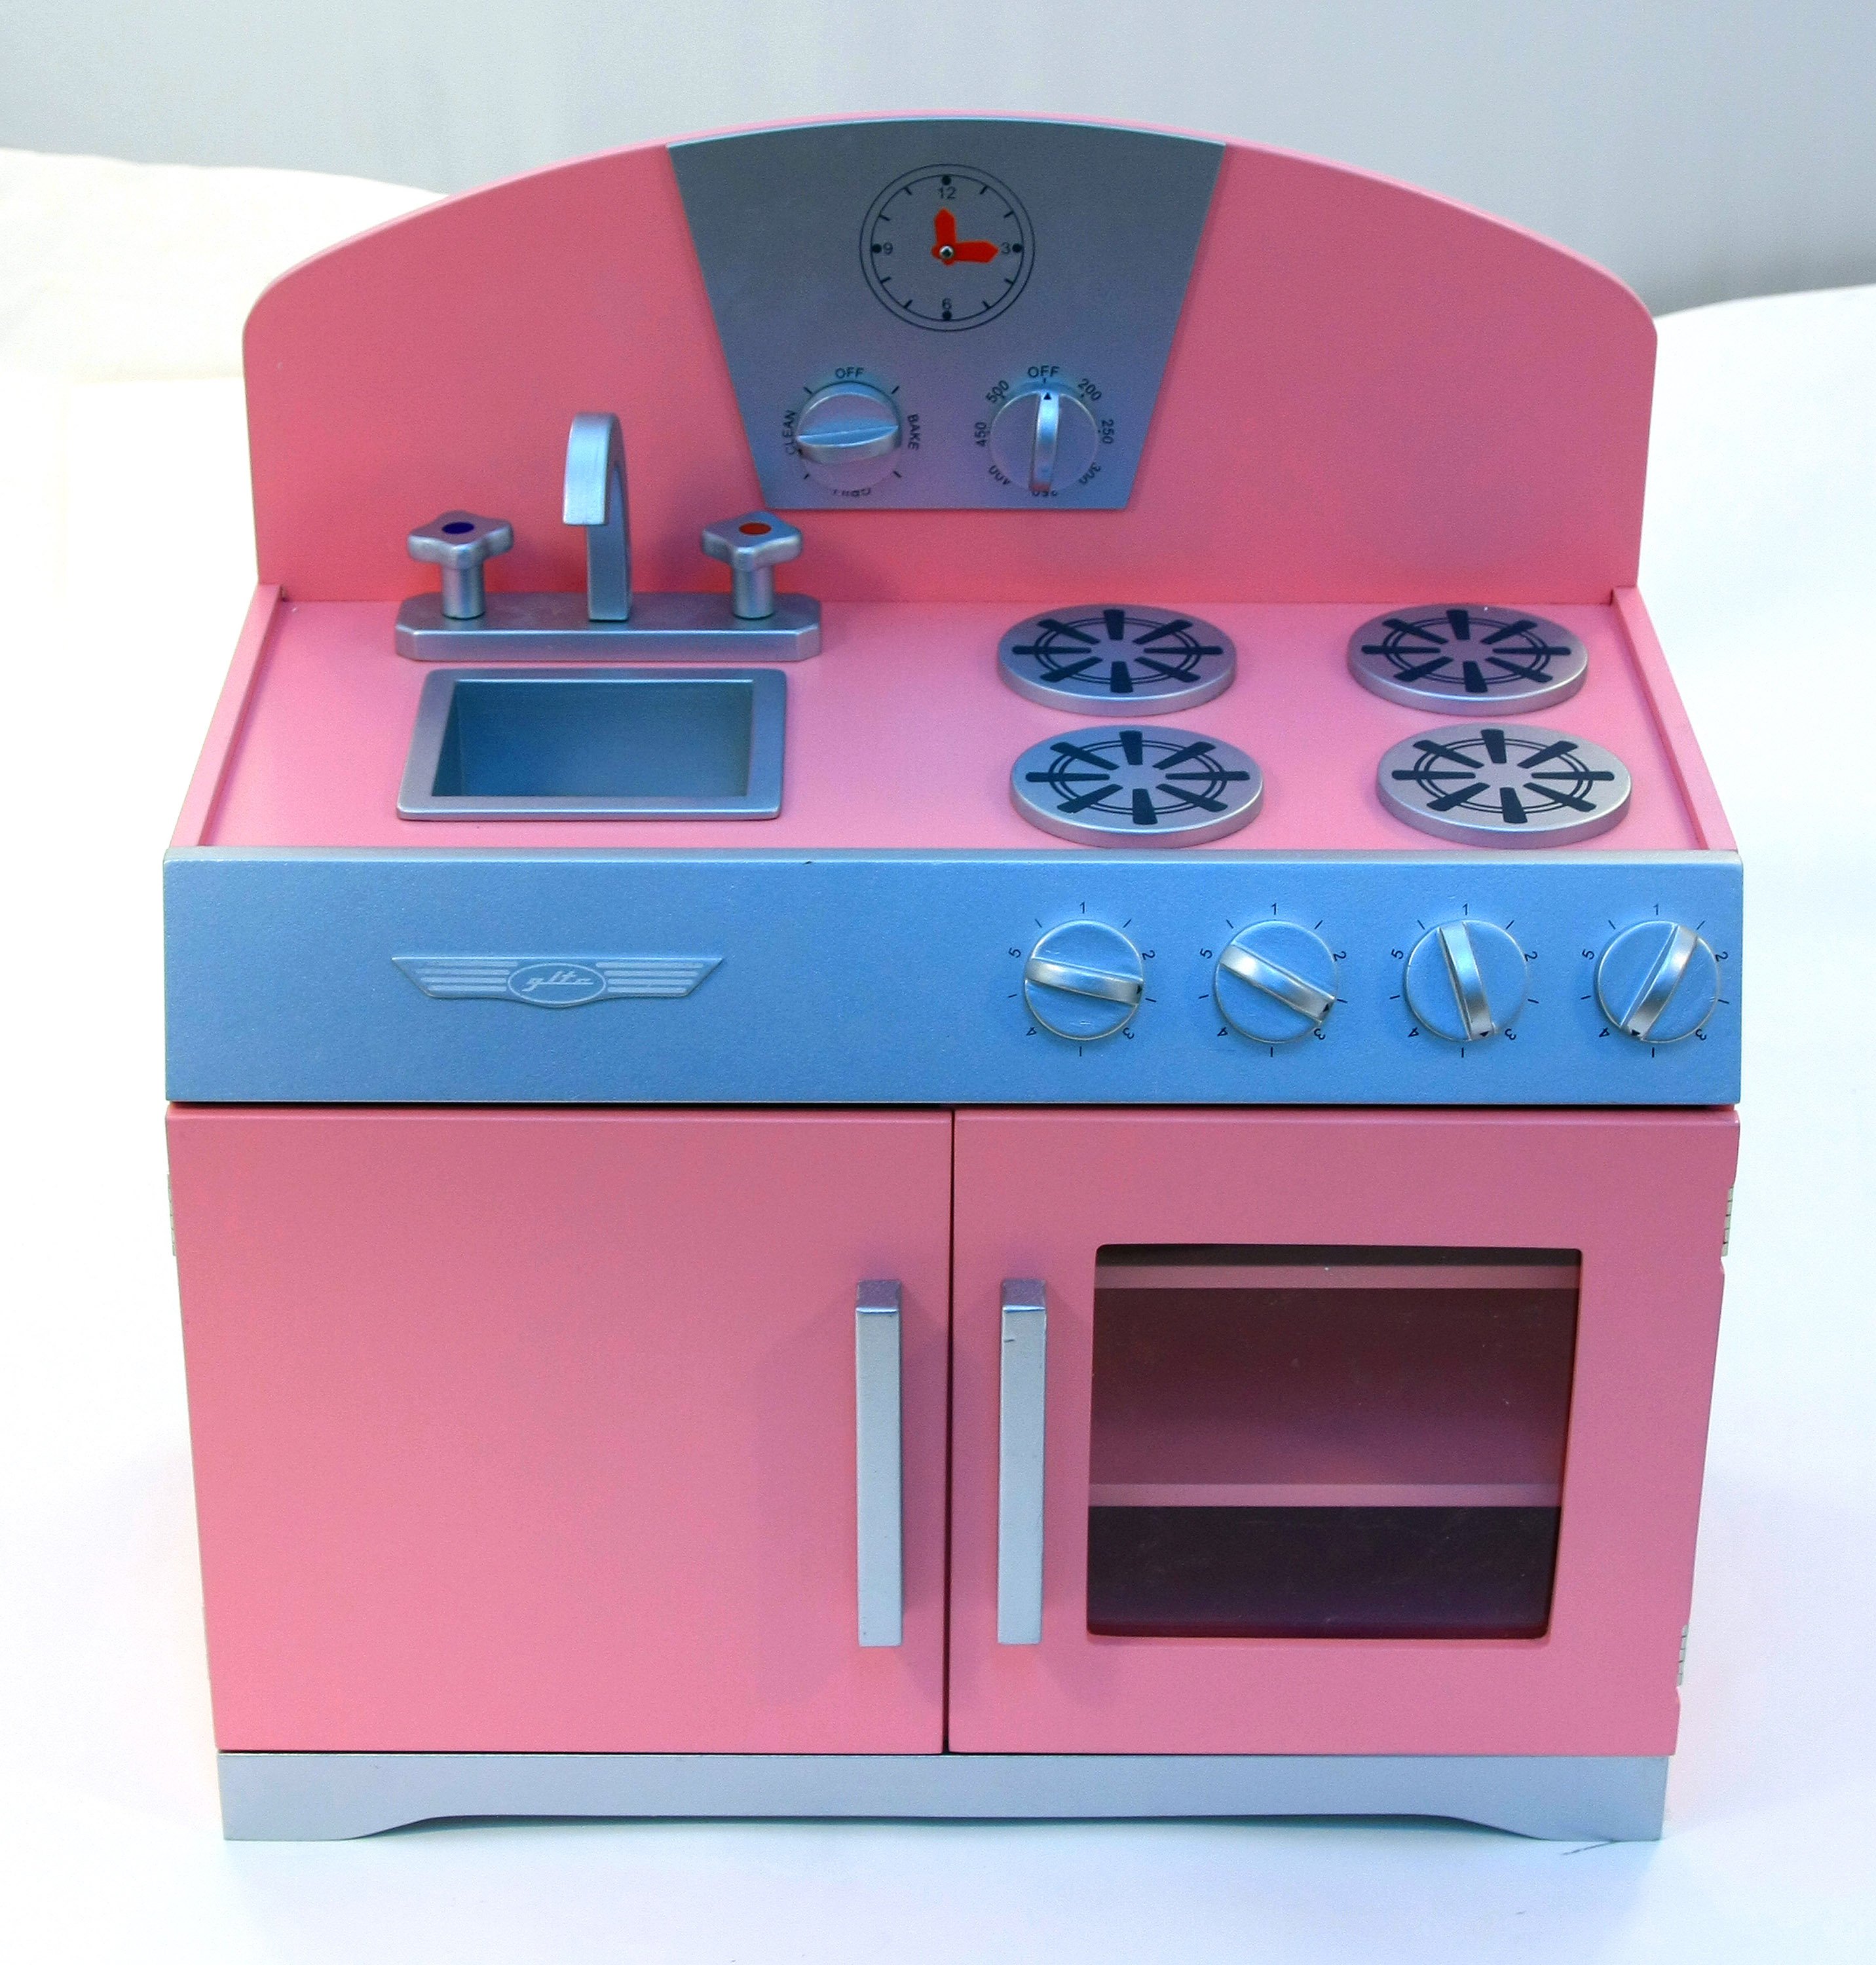 Picture of A+ Childsupply M9011 Retro Cooking Range with Sink